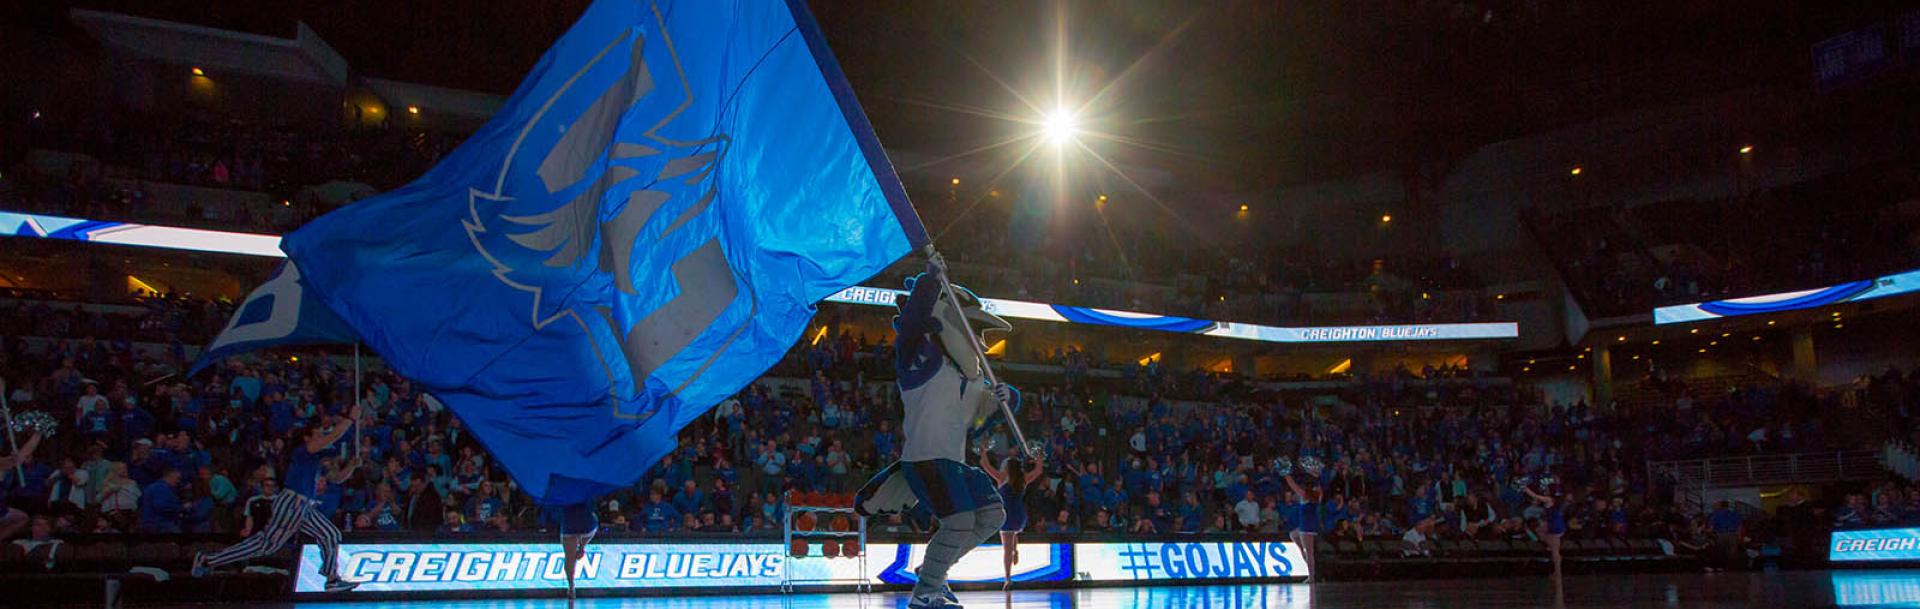 Billy Bluejay at Basketball Game with Flag